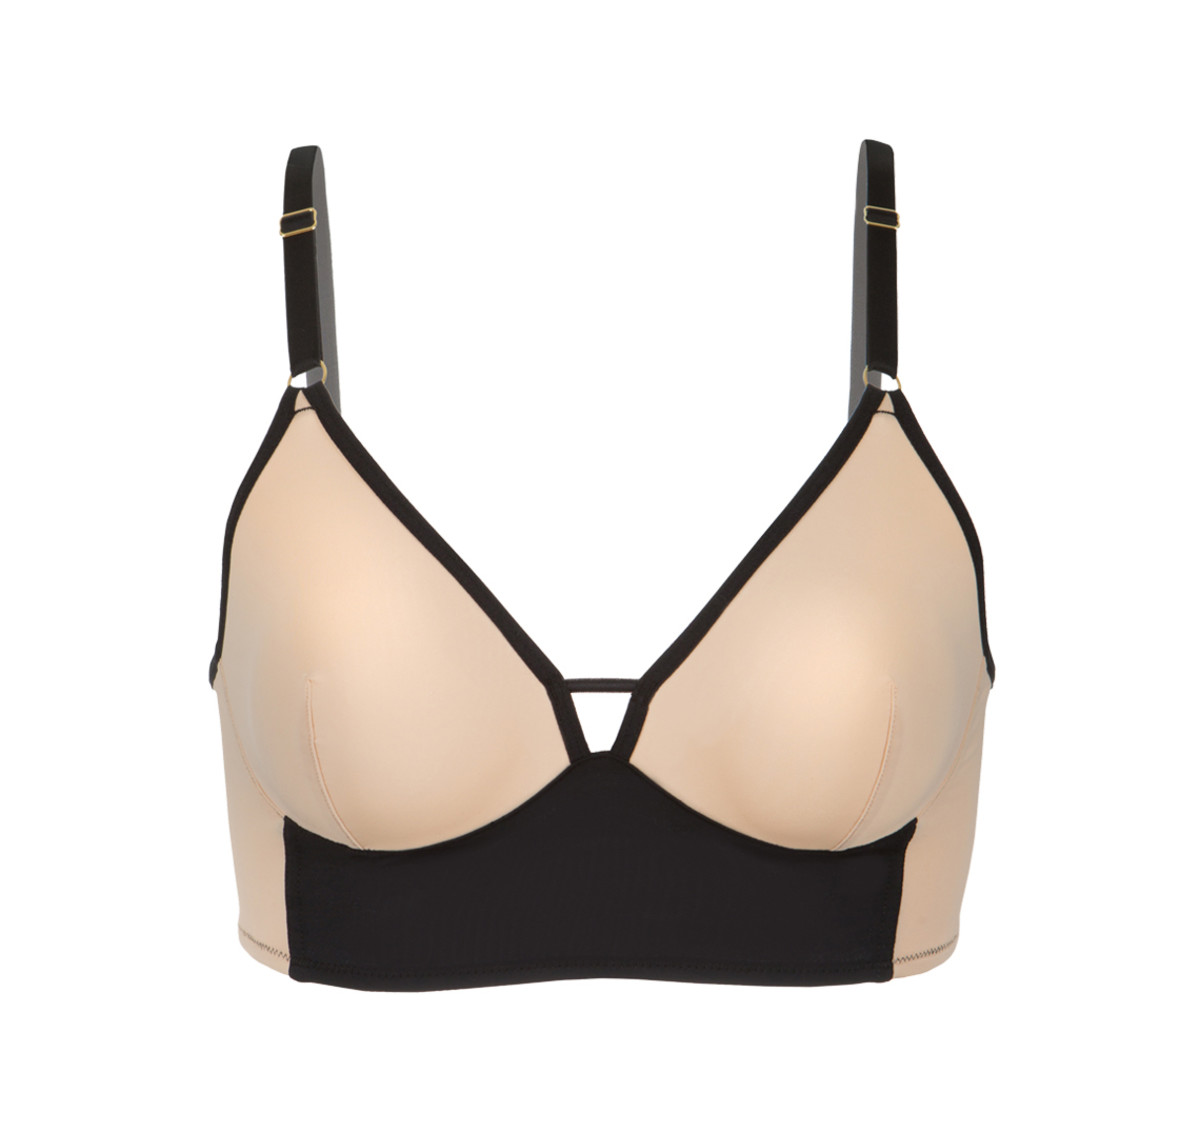 A bra that I actually don't hate wearing! The Long-Lined Bralette in Toasted Almond/Jet Black, $35, available at Lively.